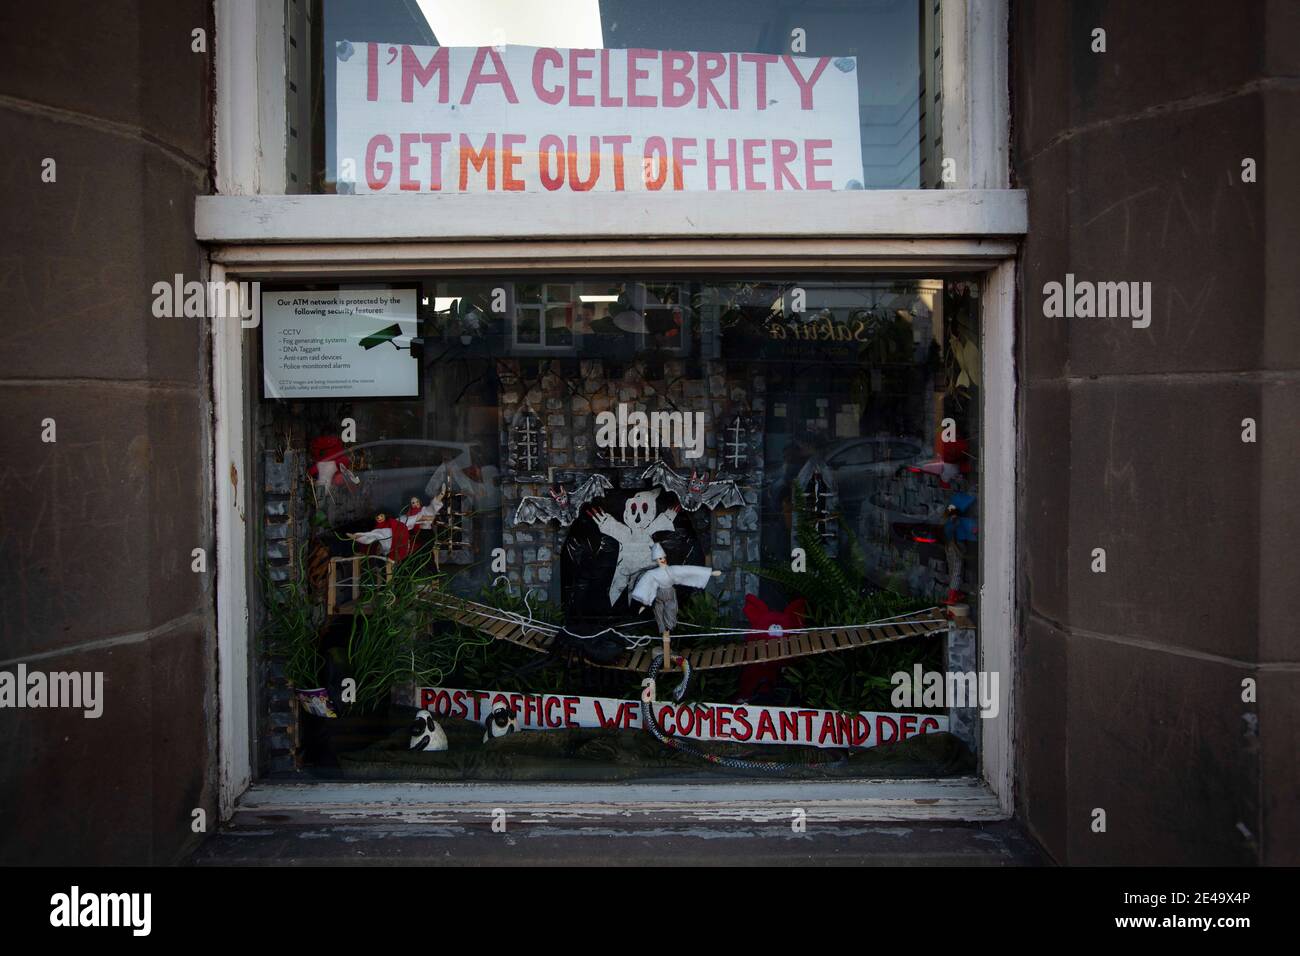 A shop front in Abergele, north Wales, decorated in tribute to the television show I'm A Celebrity Get Me Out Of Here, which is being filmed in Gwrych Castle on the outskirts of the town. There have been reports that non-native species of insects such as cockroaches have escaped from the set and found their way into the local environment. Stock Photo